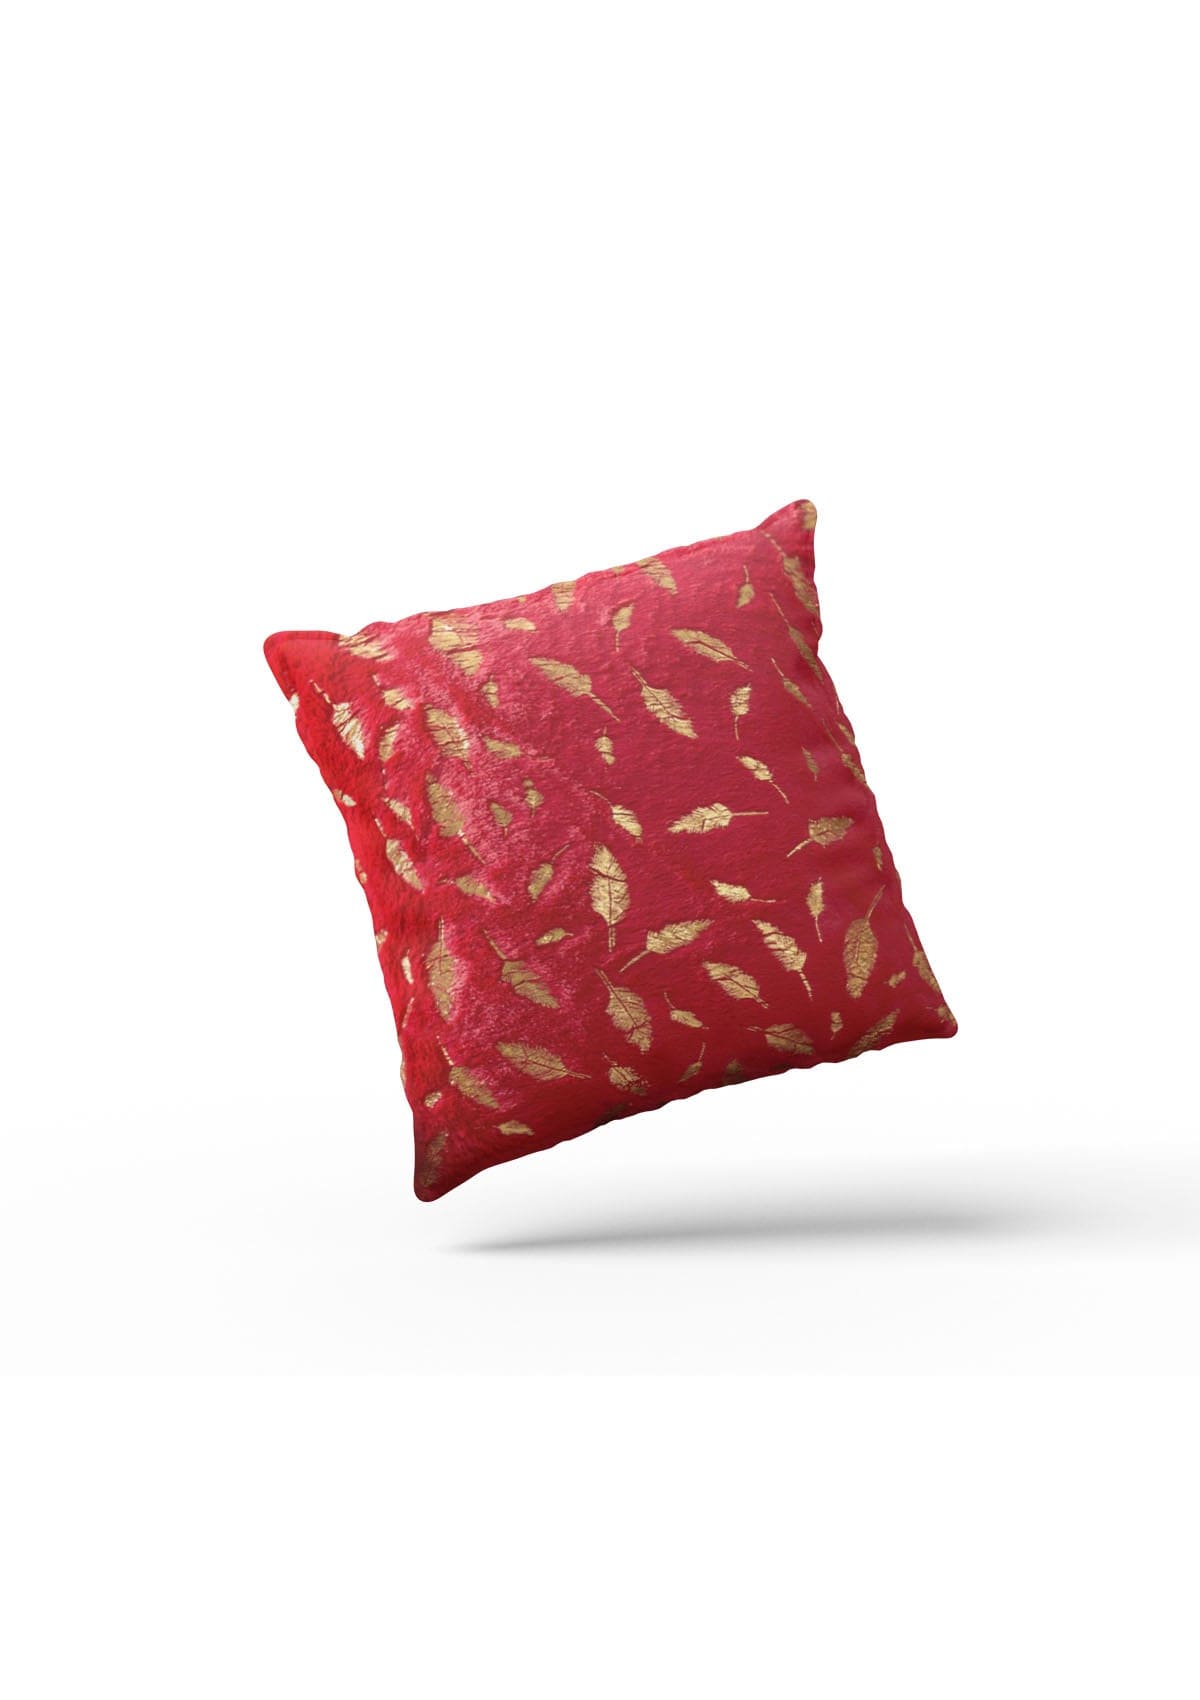 Red and Gold Cushion Covers | CovermyCushion